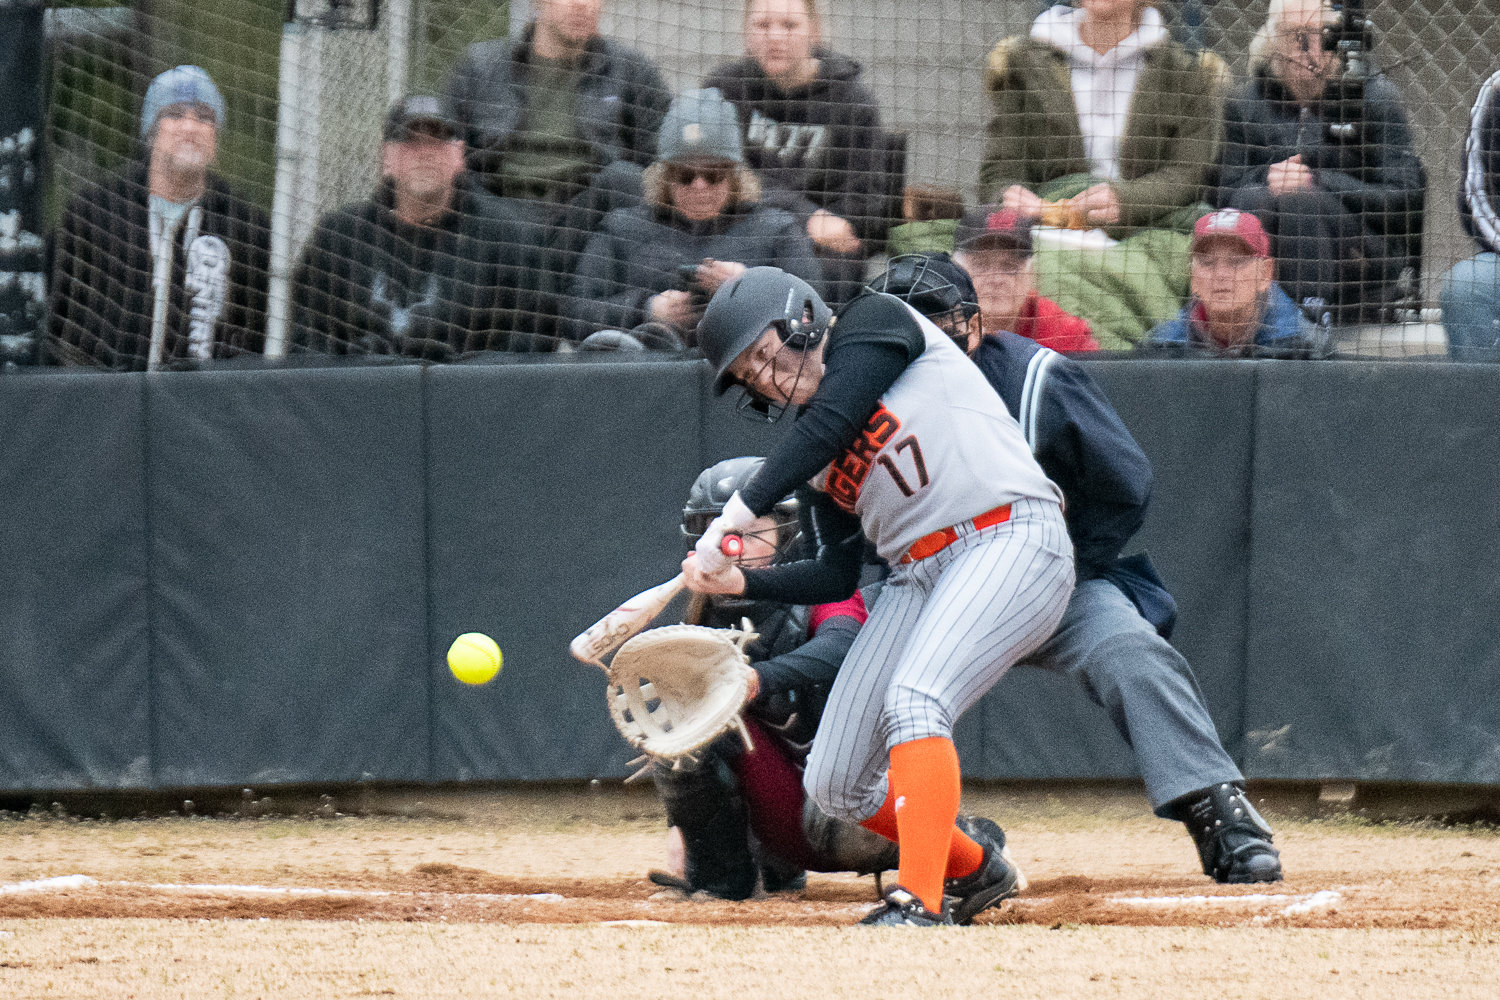 Payton Baumel hits a single during the second inning of Centralia's 5-3 win over W.F. West on March 28.